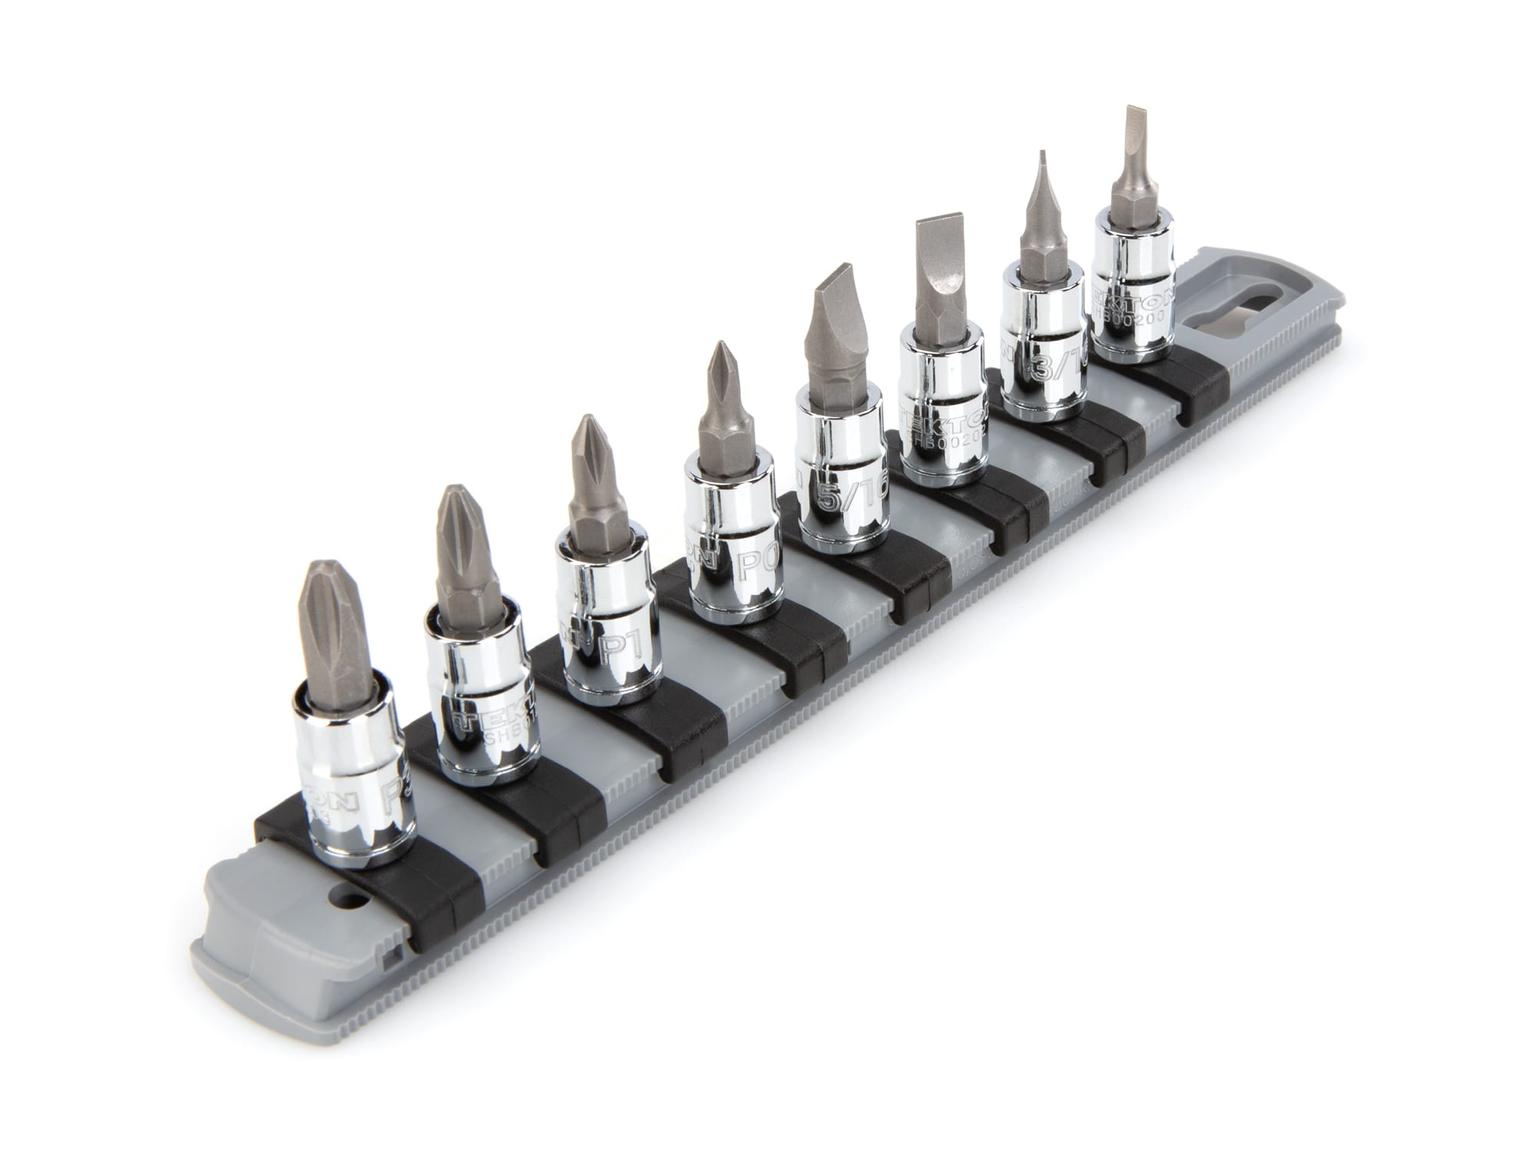 TEKTON SHB90104-T 1/4 Inch Drive Phillips/Slotted Bit Socket Set with Rail, 8-Piece (#0-#3, 1/8-5/16 in.)